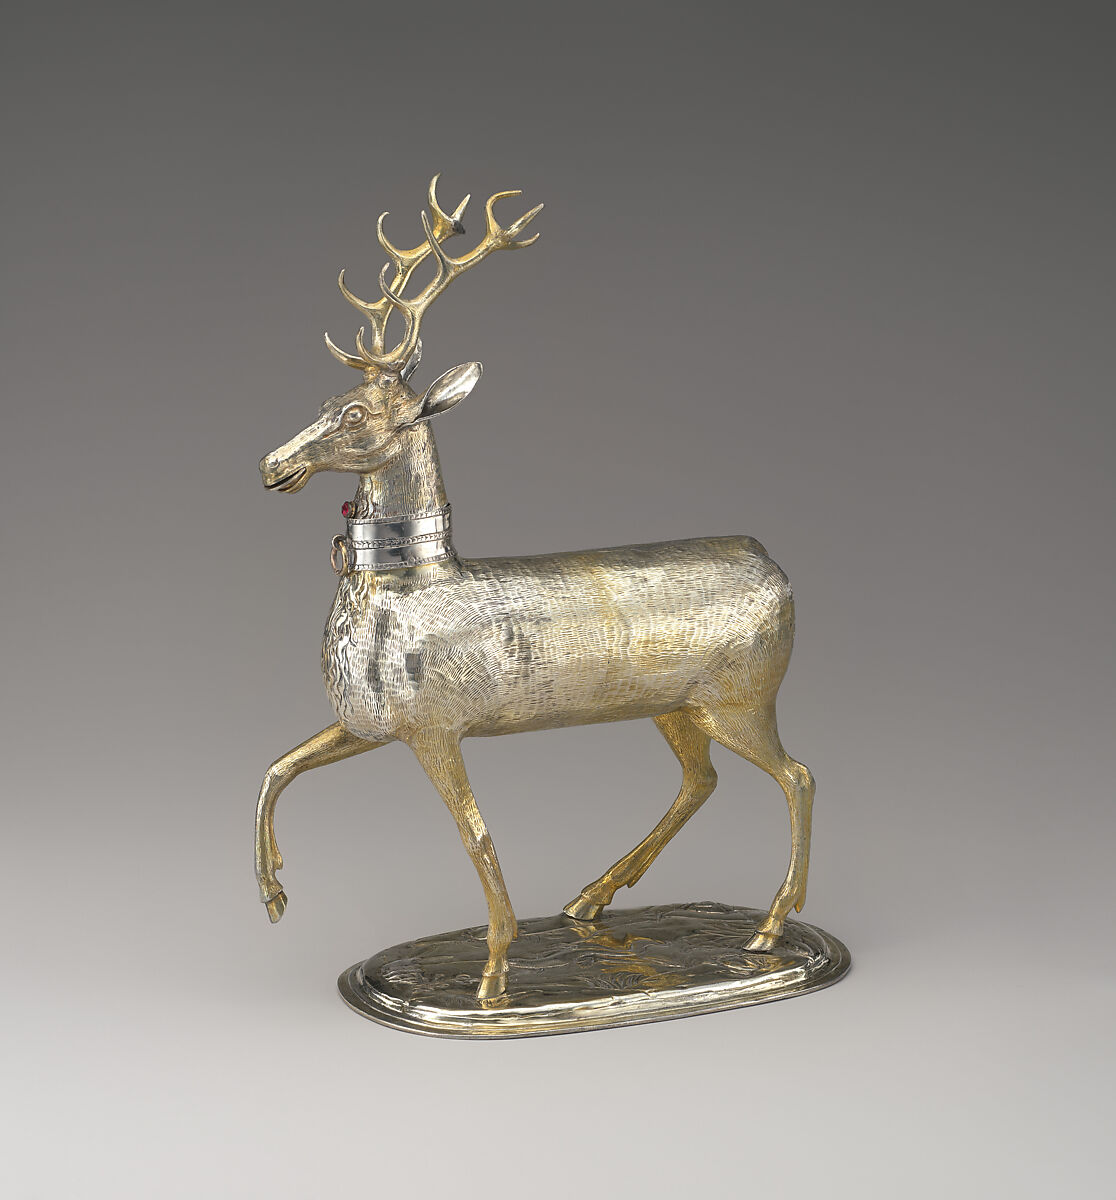 Cup in the form of a stag, Christoph Beham, Partly gilded silver, gemstone, German, Augsburg